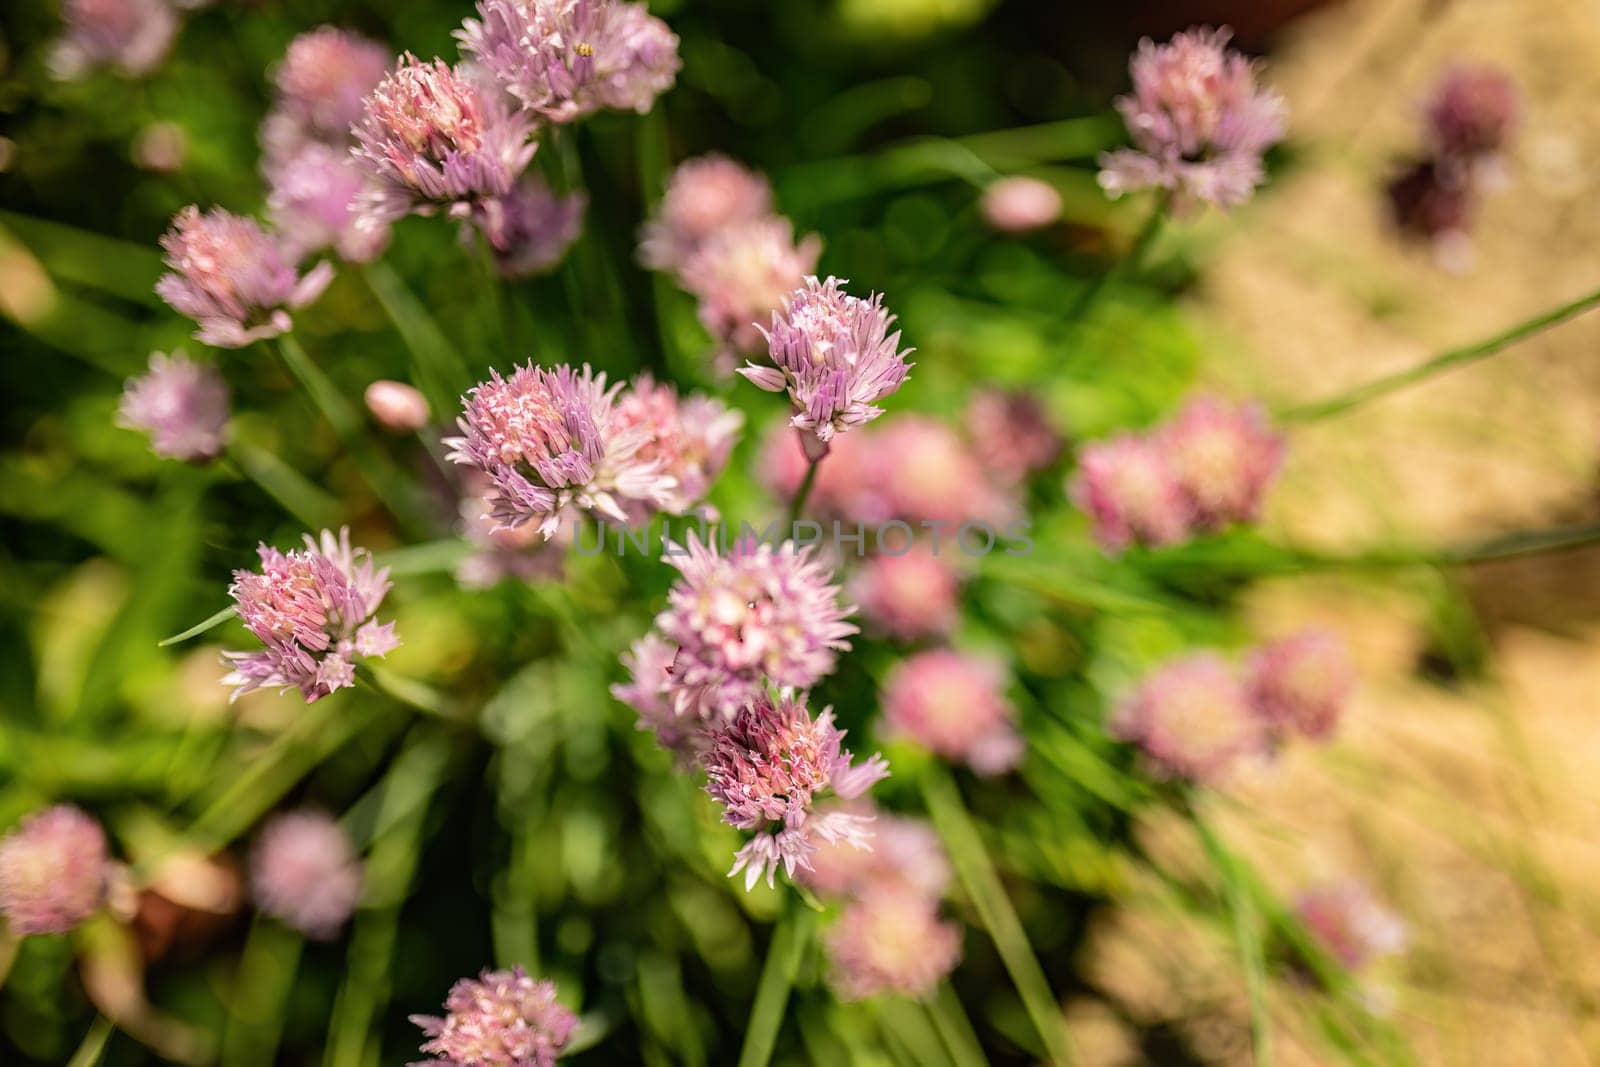 Vibrant chive flower blooming in a natural setting, highlighting delicate purple petals.